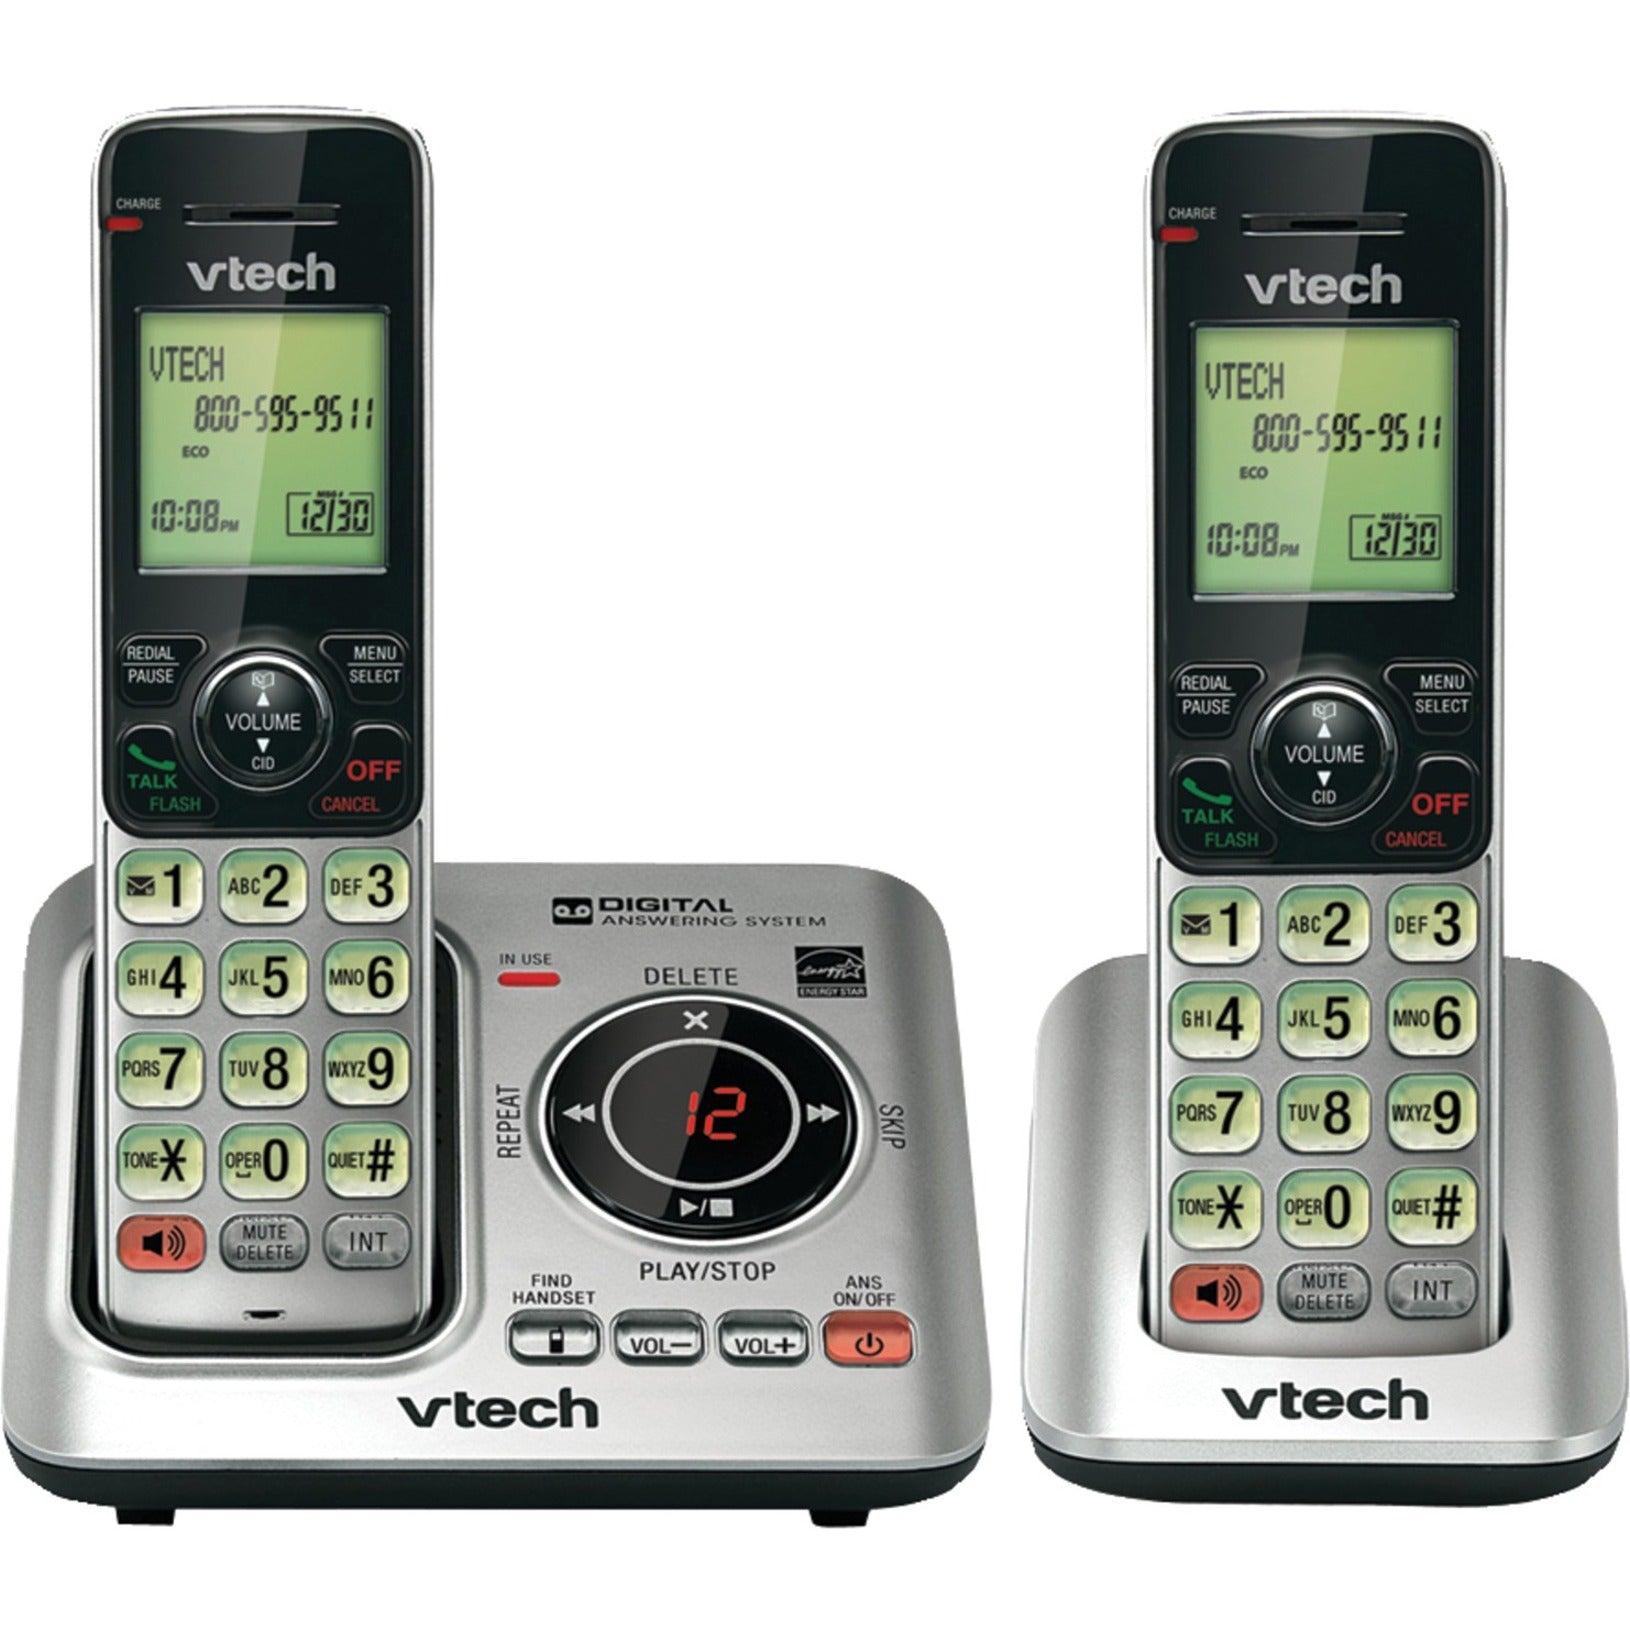 VTech VTCS6629-2 2 Handset Answering System with Caller ID/Call Waiting, DECT 6.0 Cordless Phone, Silver